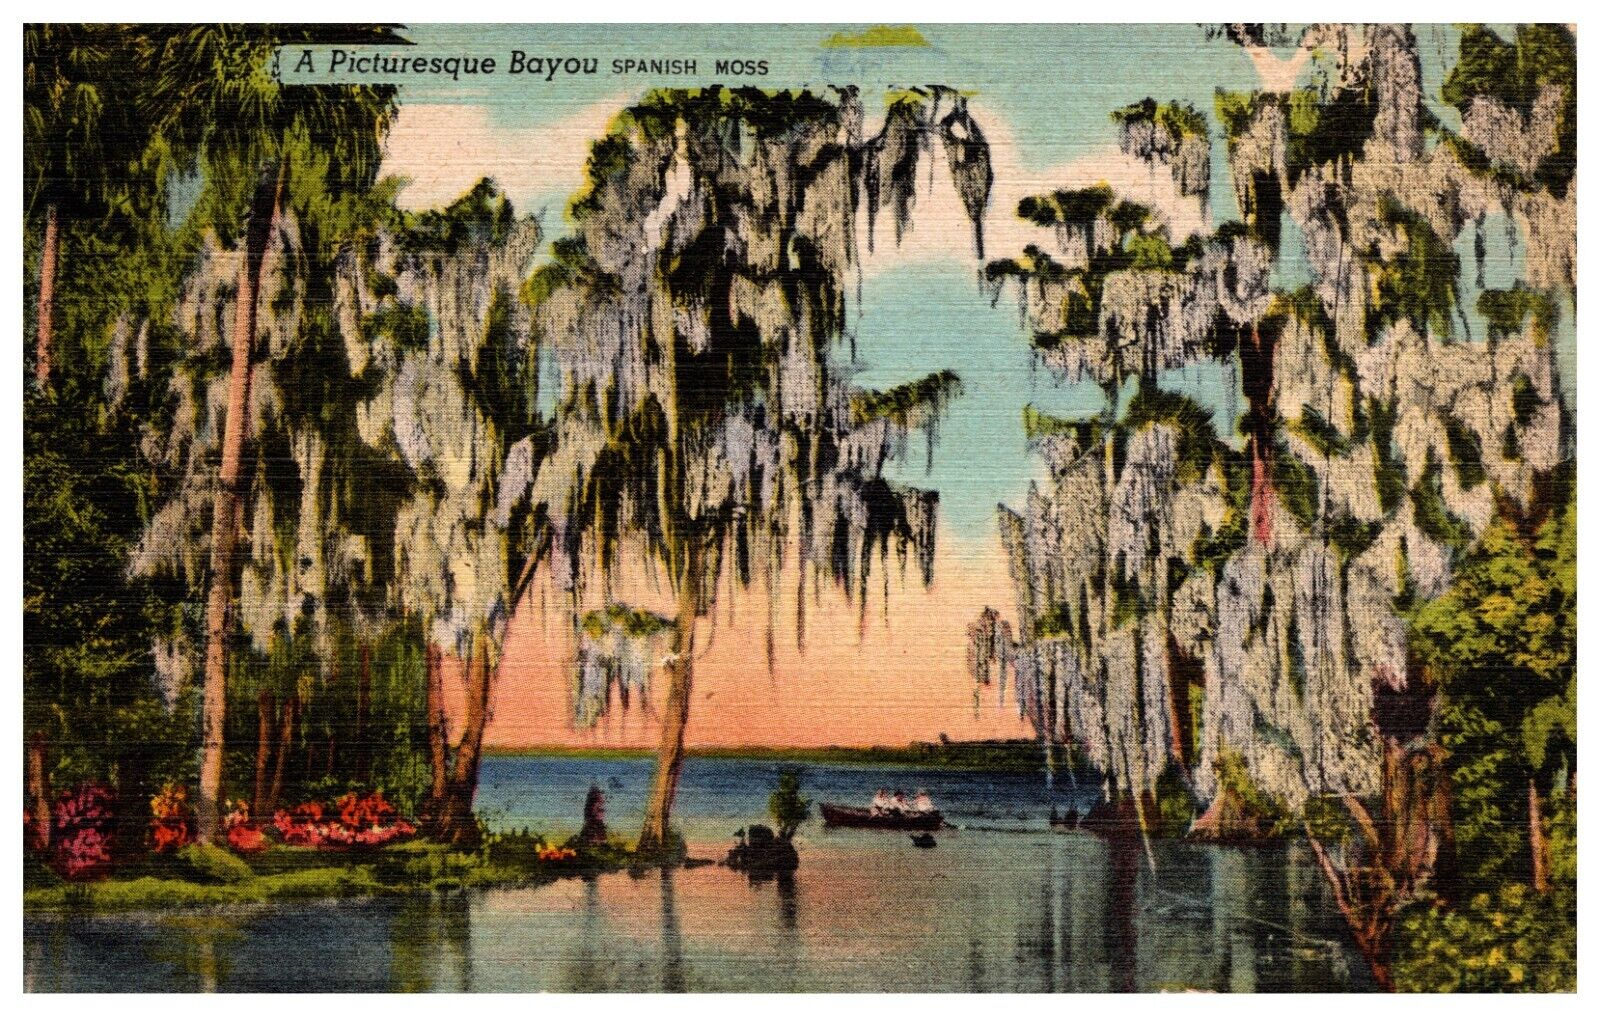 A Picturesque Bayou With Spanish Moss Southland News Co. Vintage Linen Postcard